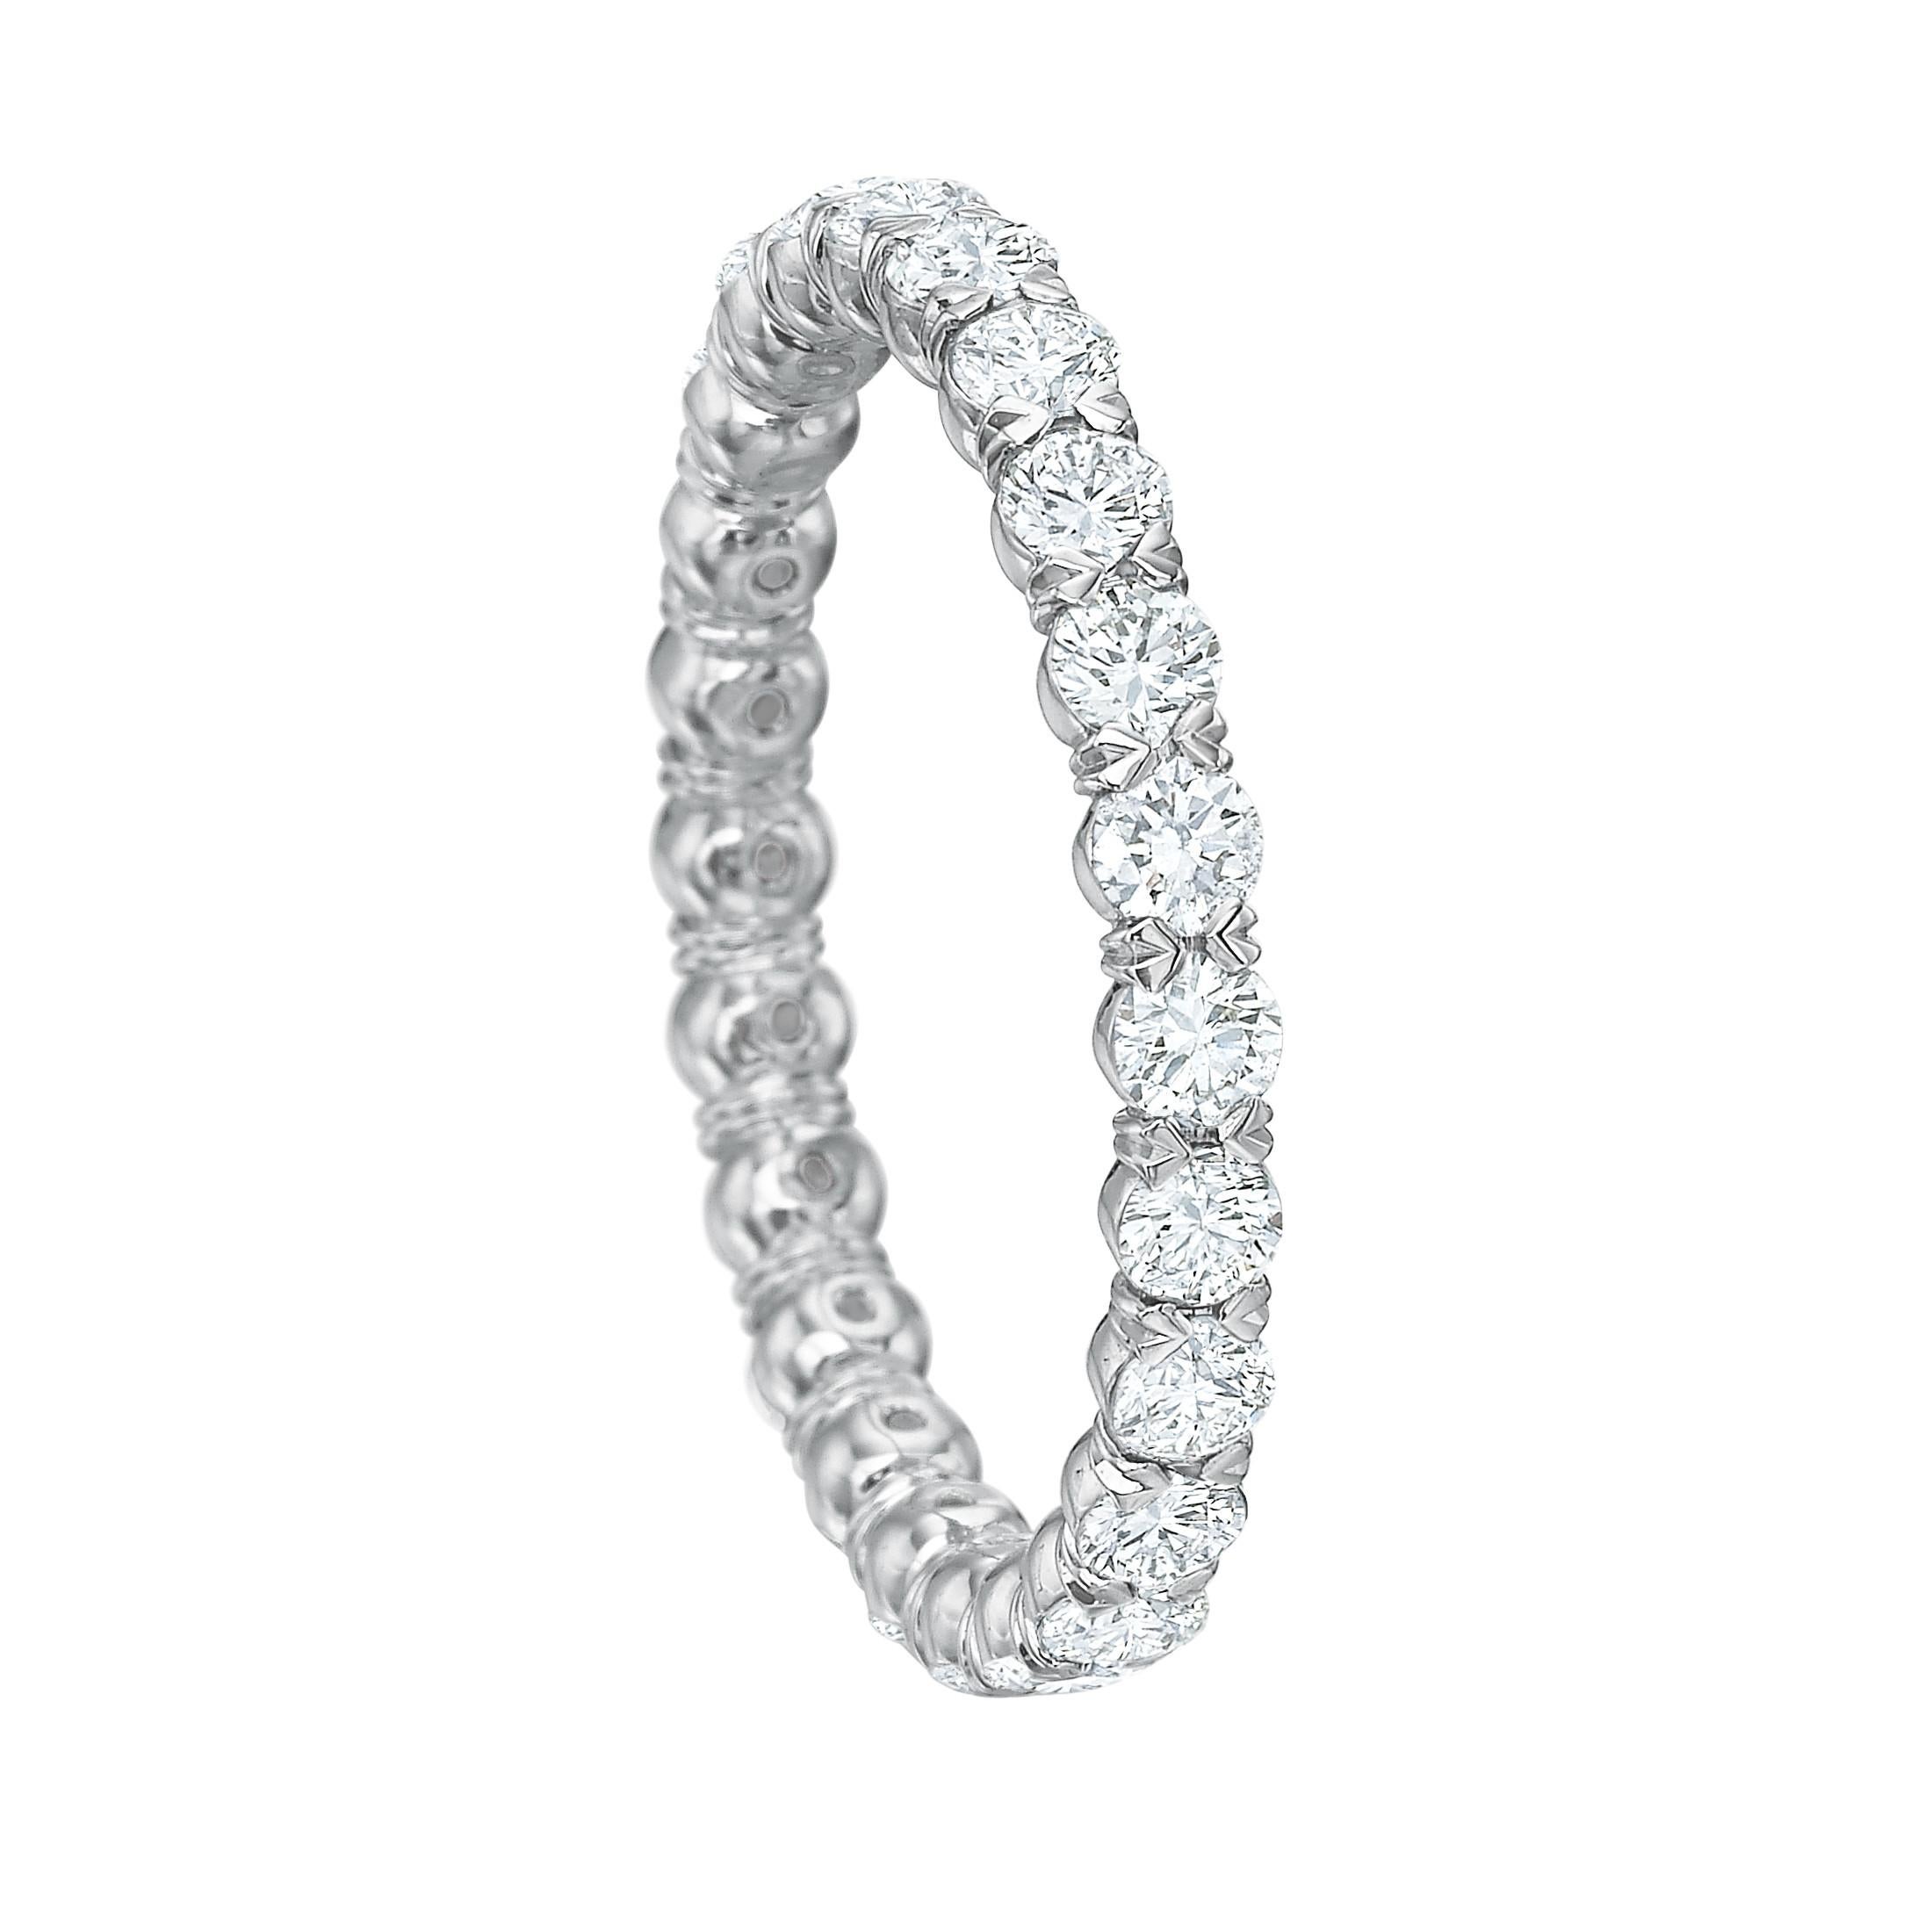 Diamond eternity band ring, showcasing round brilliant-cut diamonds set with shared prongs in a sculpted platinum mounting.

Twenty-four diamonds weighing 1.18 total carats
2.5mm wide
Size 6